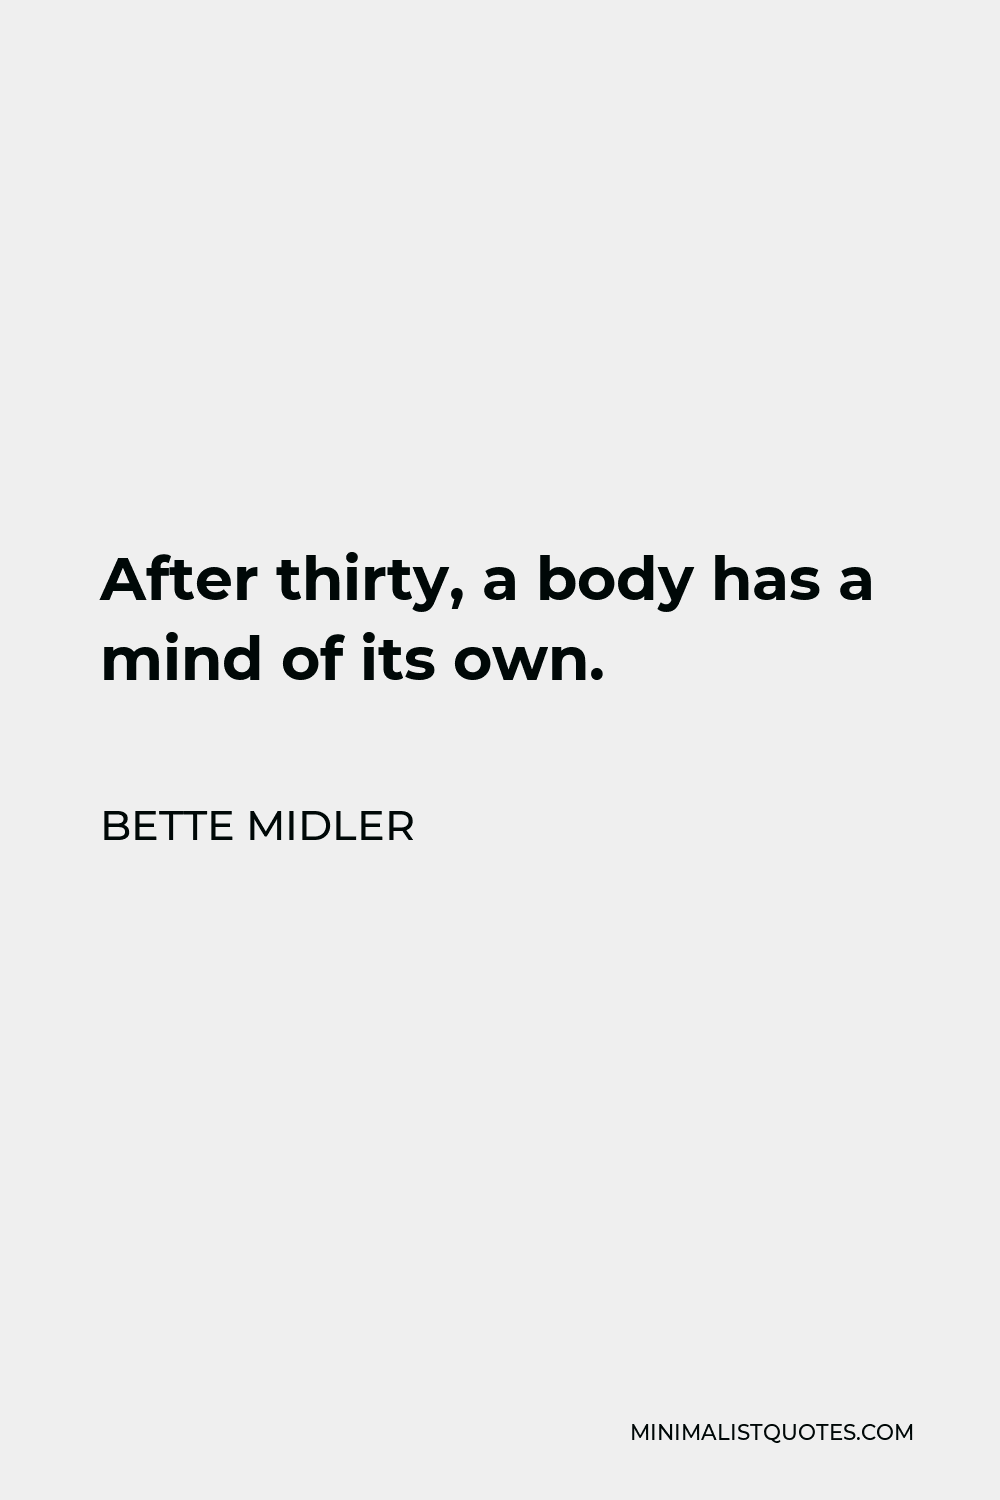 Bette Midler Quote - After thirty, a body has a mind of its own.